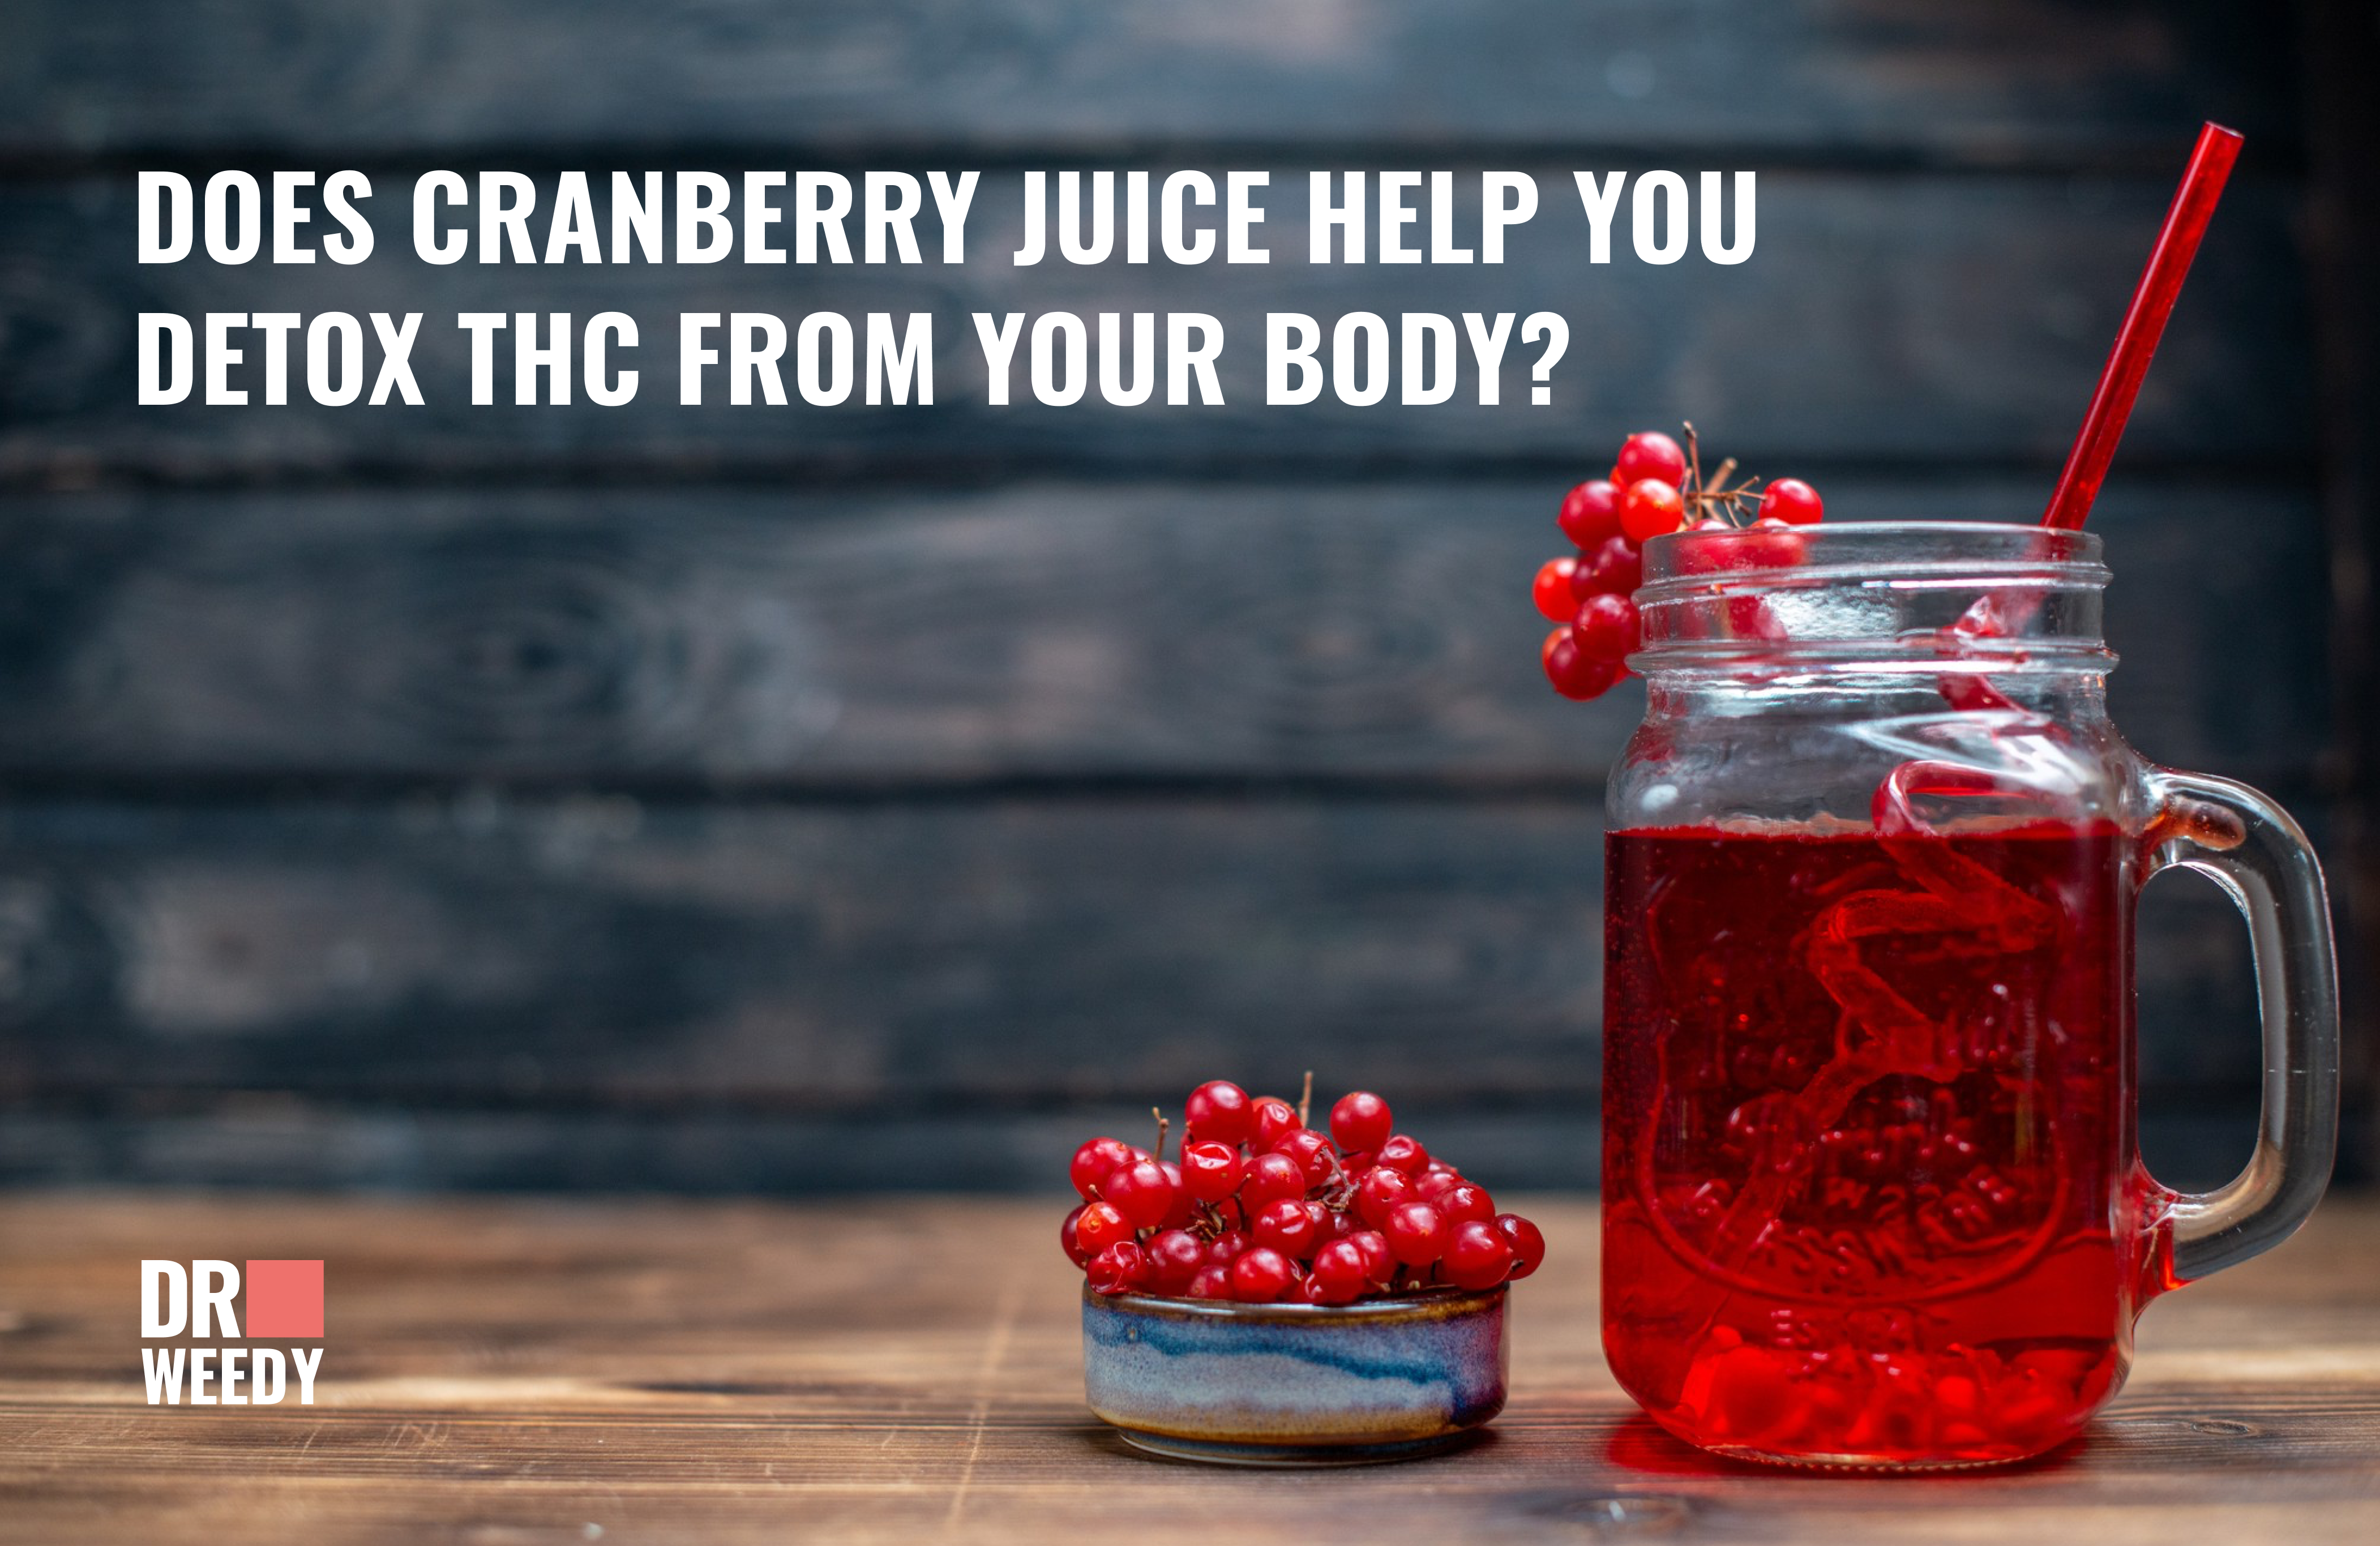 Does Cranberry Juice Help You Detox THC from Your Body?